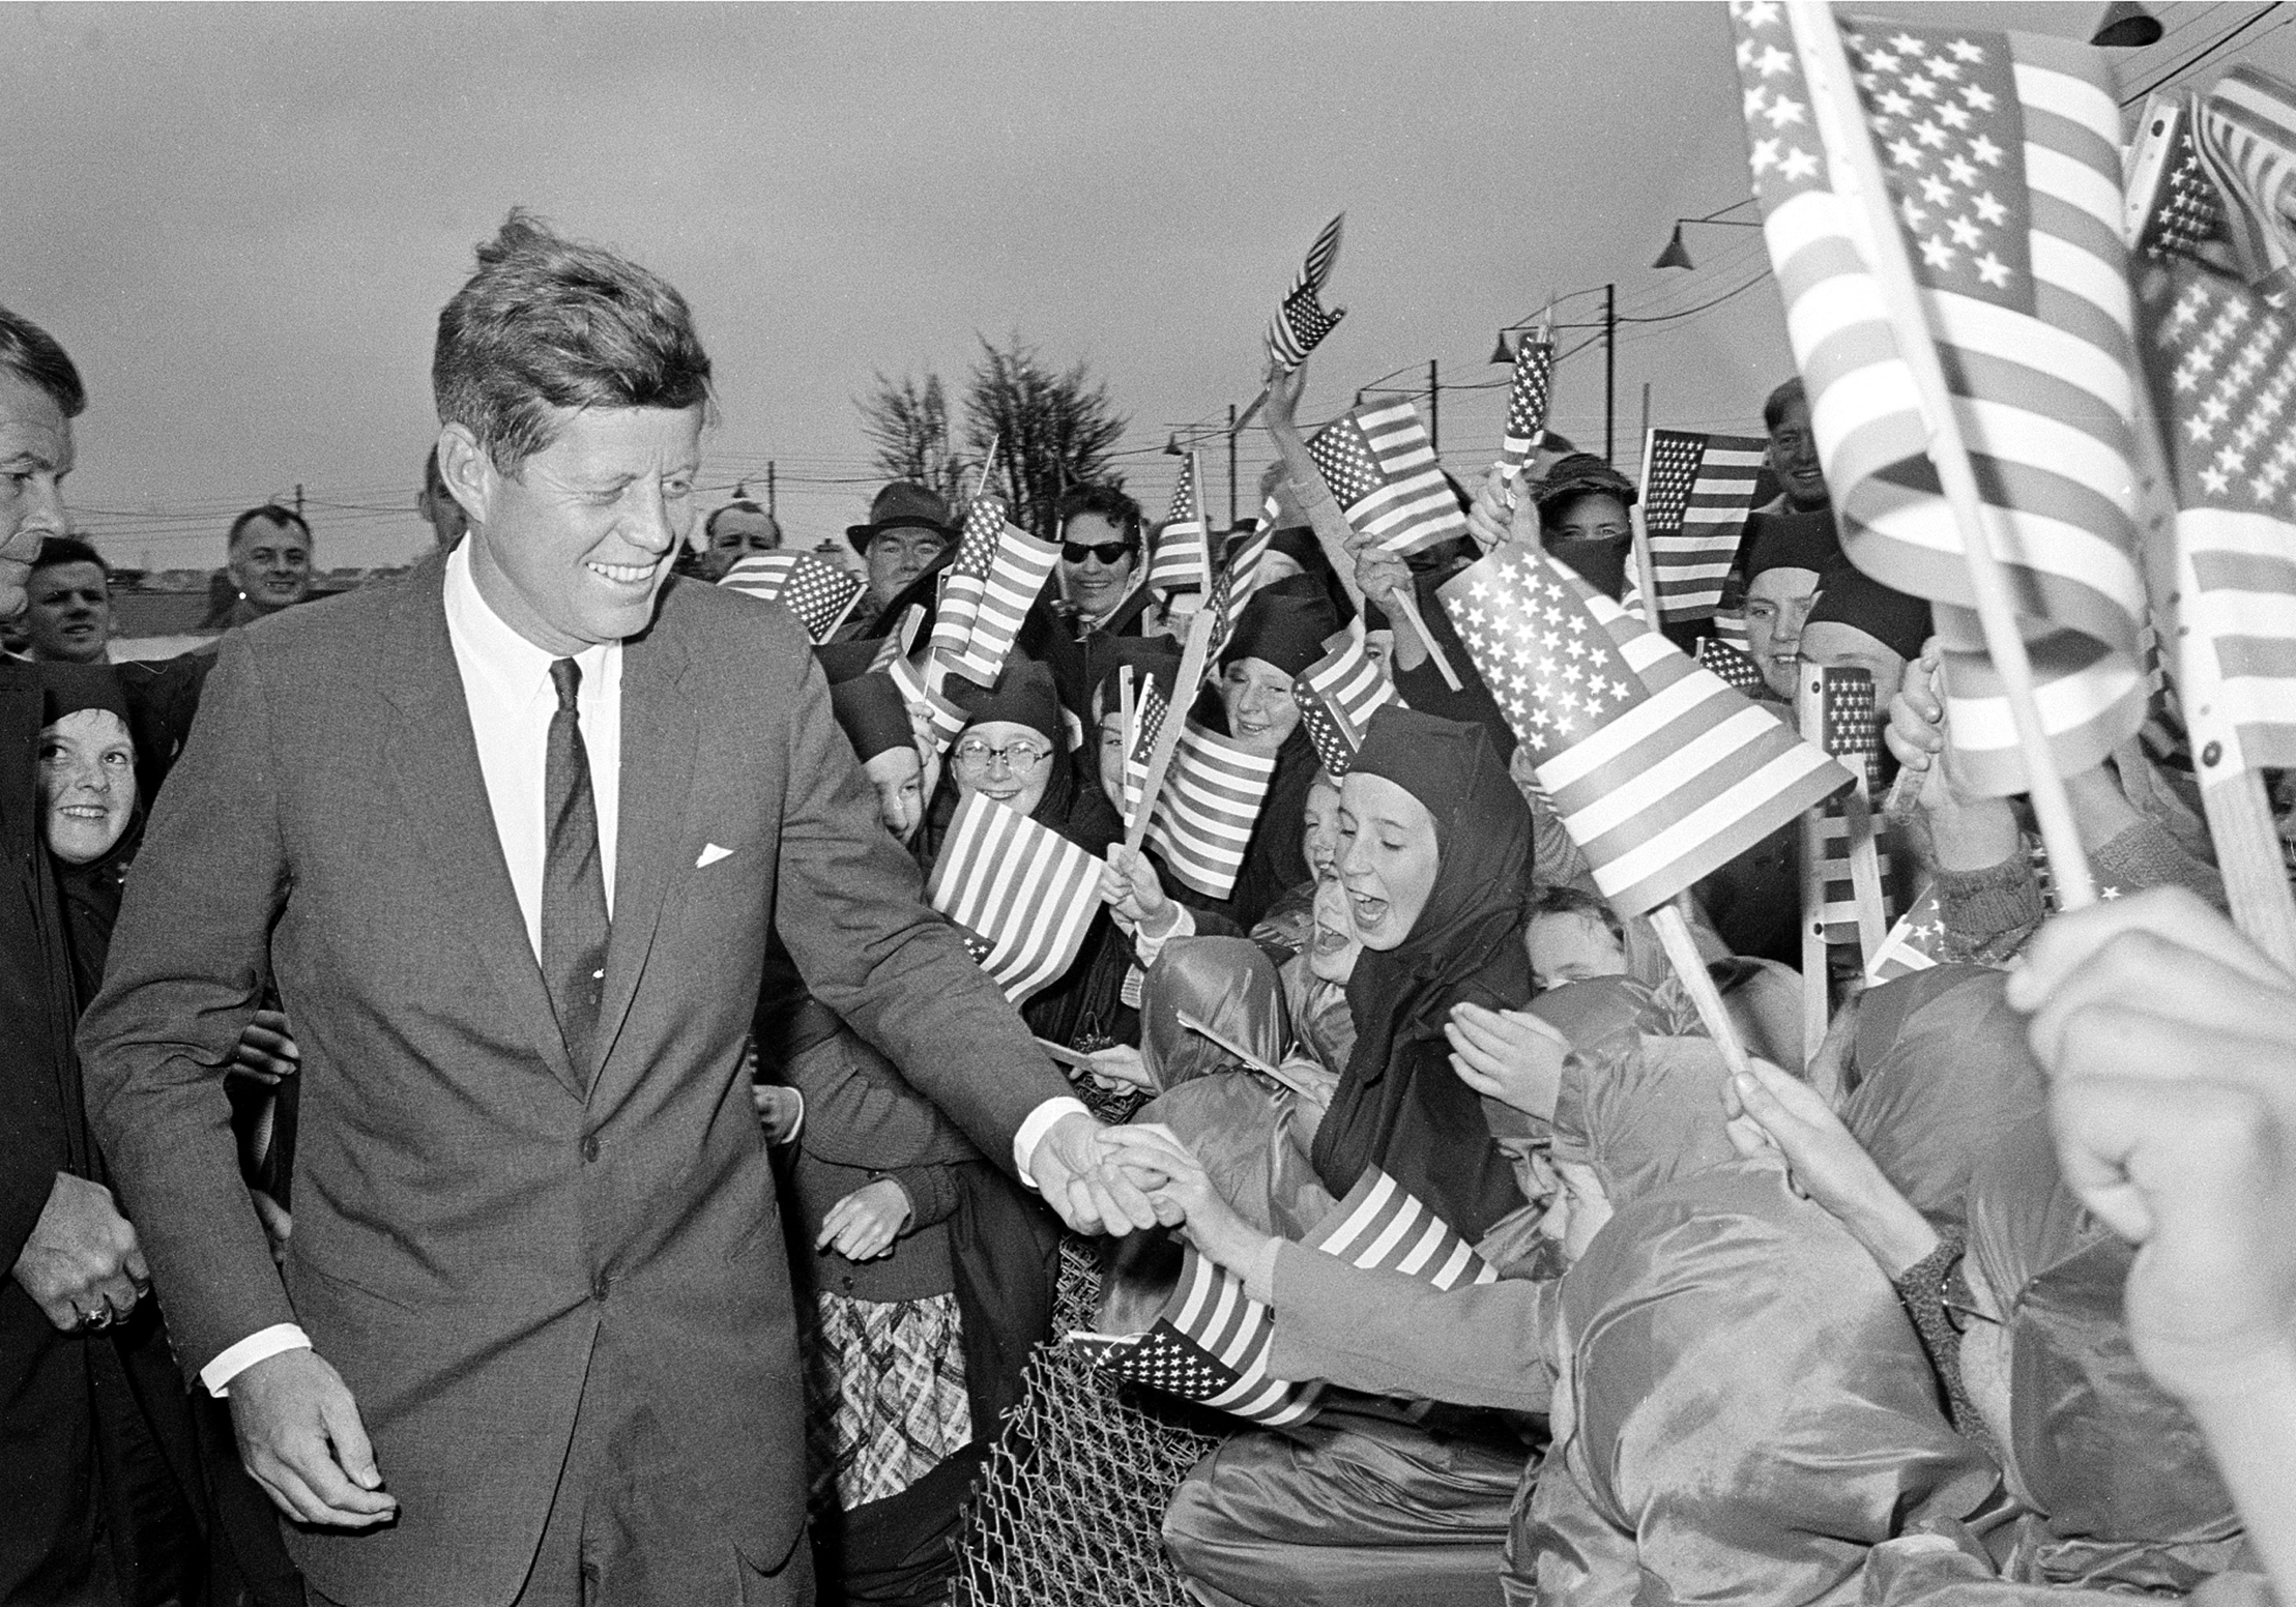 U.S. President John F. Kennedy is greeted by an enthusiastic crowd of children and nuns from the Convent of Mercy, as he arrives from Dublin by helicopter at Galway's sports ground, Ireland, June 29, 1963. (AP Photo)